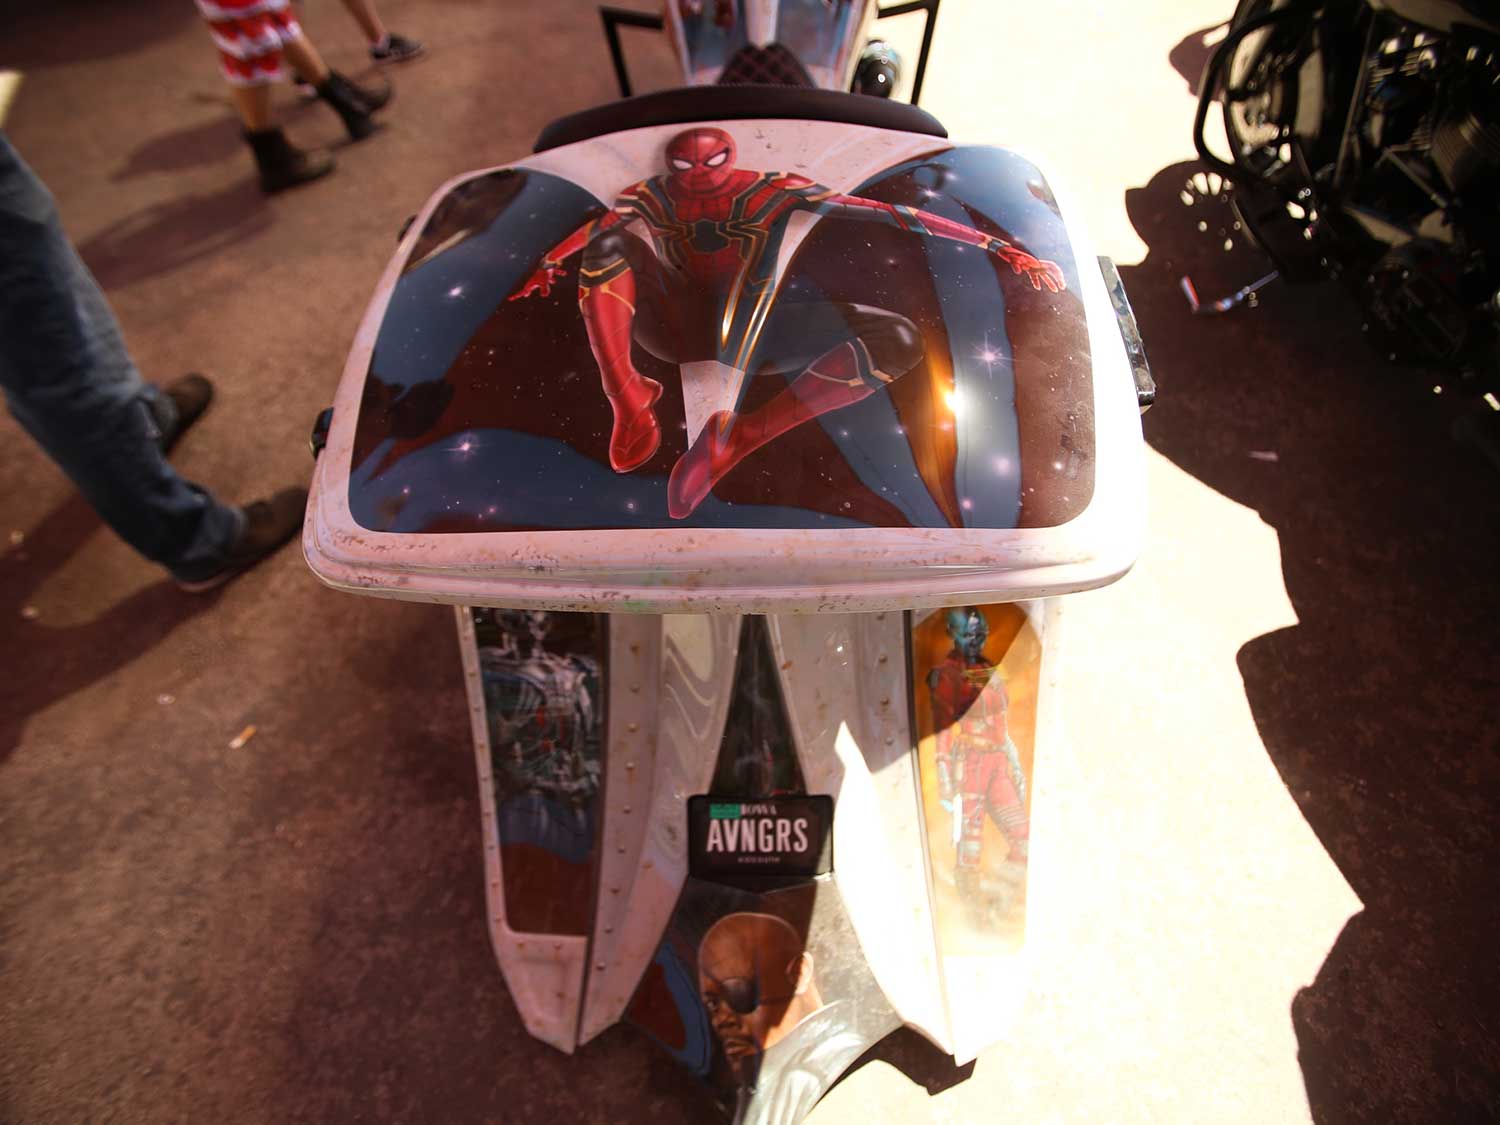 This bagger has an Avengers paint job at Sturgis 2020